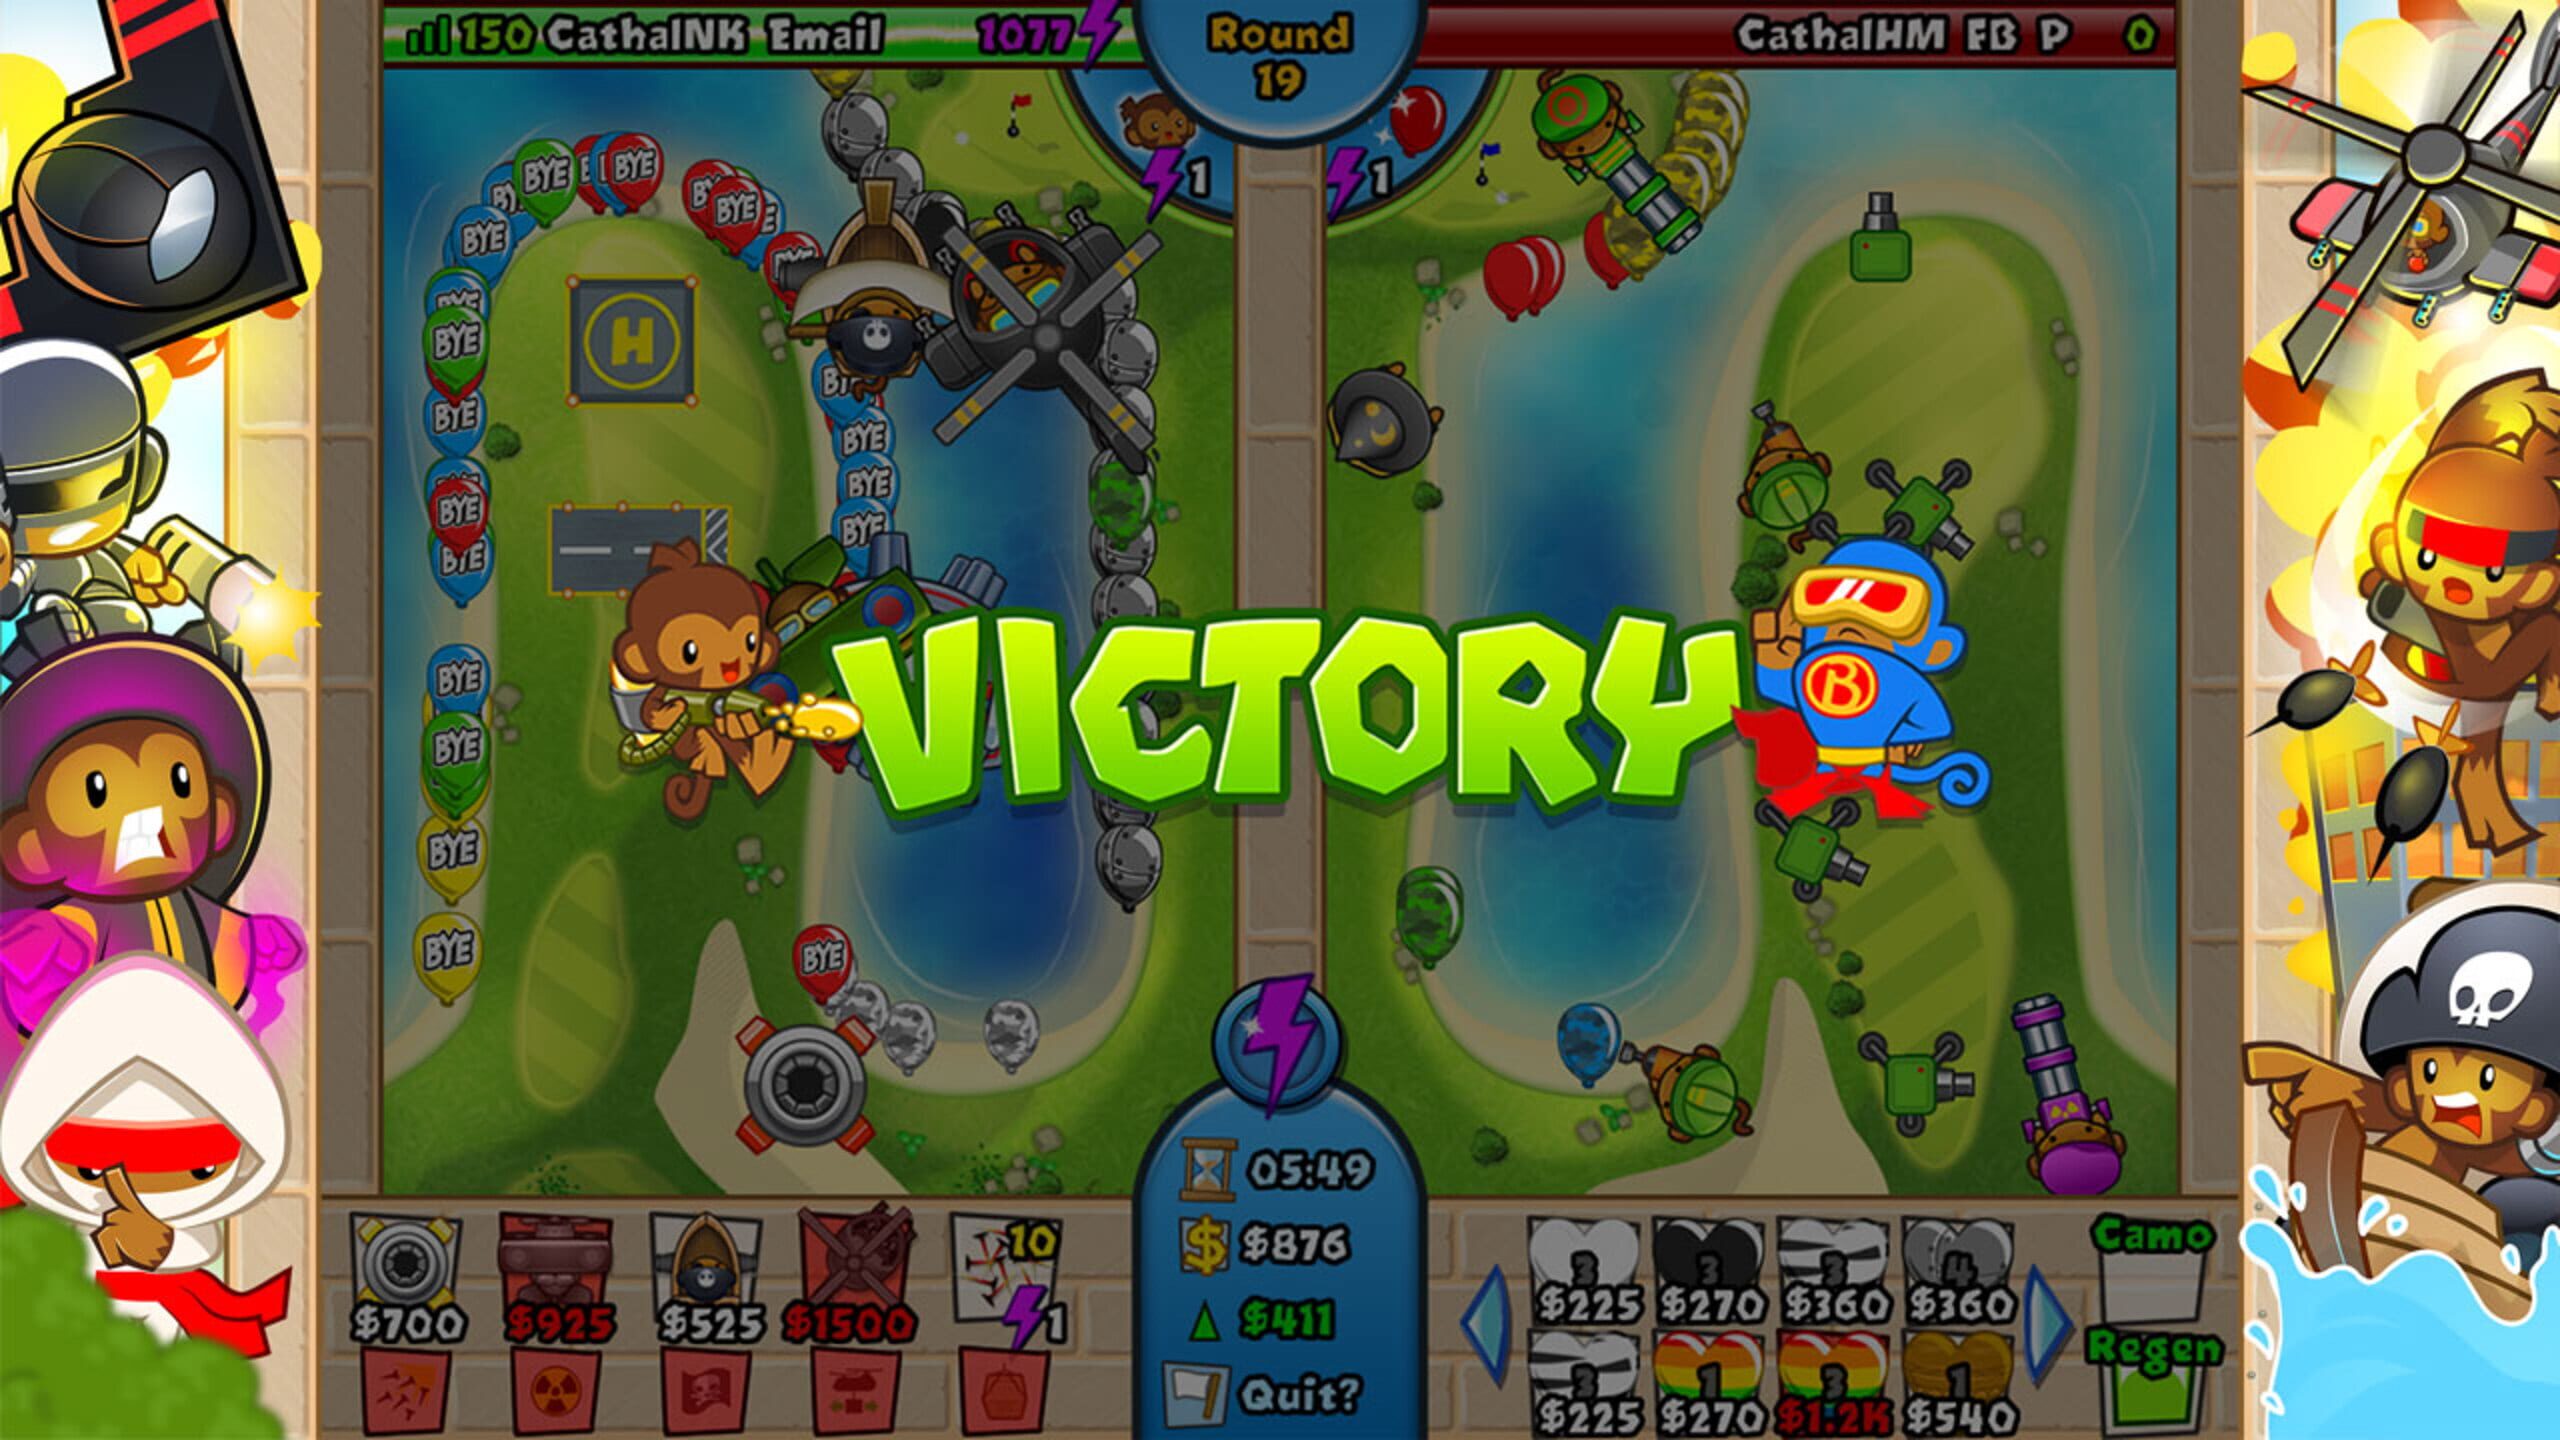 Bloons battle 2. Блунс ТД. Bloons td Battles. Игра Bloons td герои. Bloons td 6 скрин.